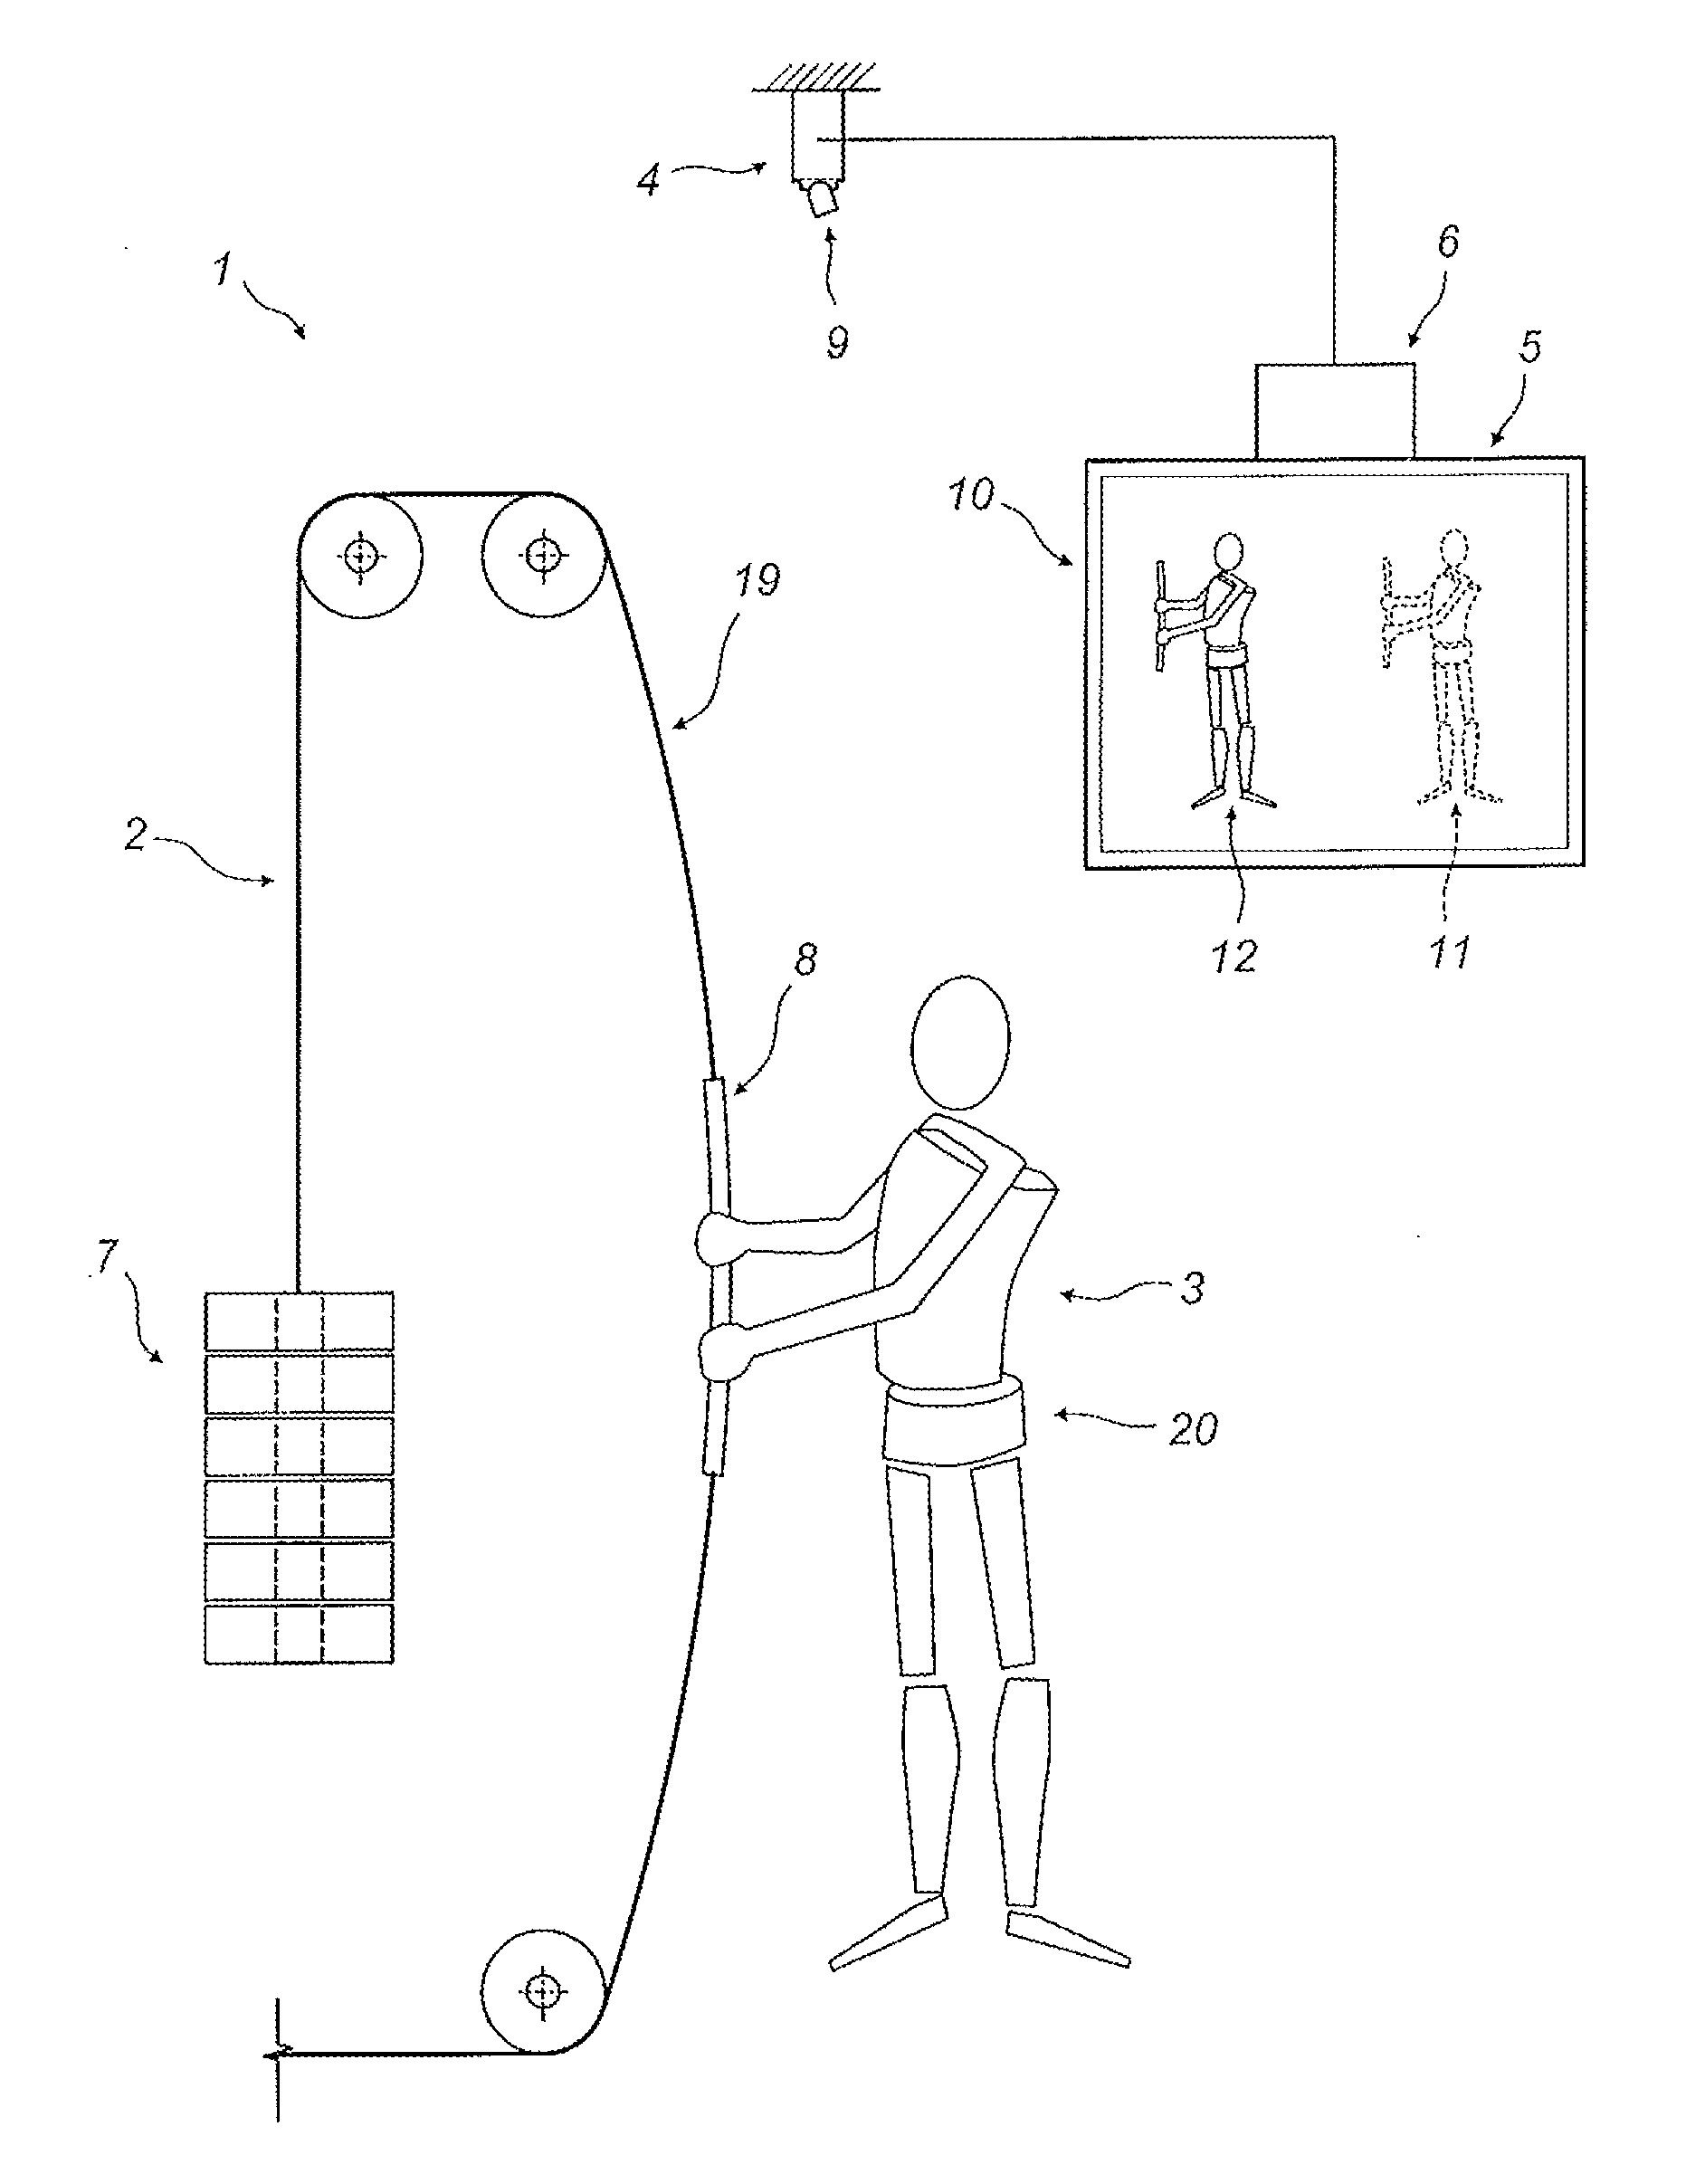 Apparatus for the assisted performance of a fitness exercise